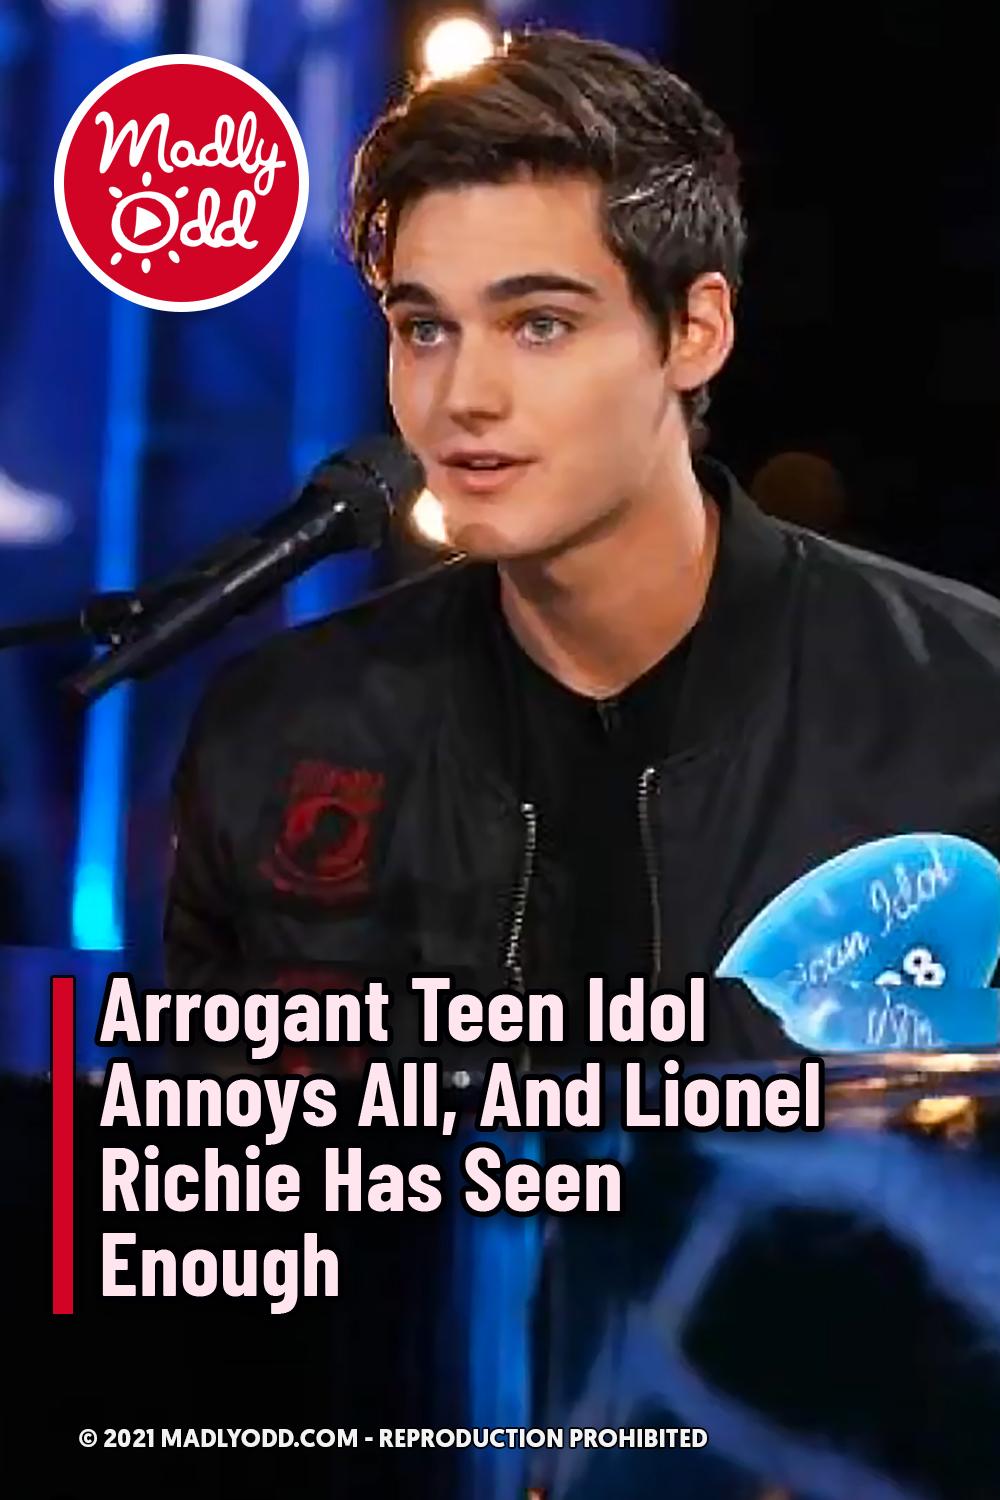 Arrogant Teen Idol Annoys All, And Lionel Richie Has Seen Enough